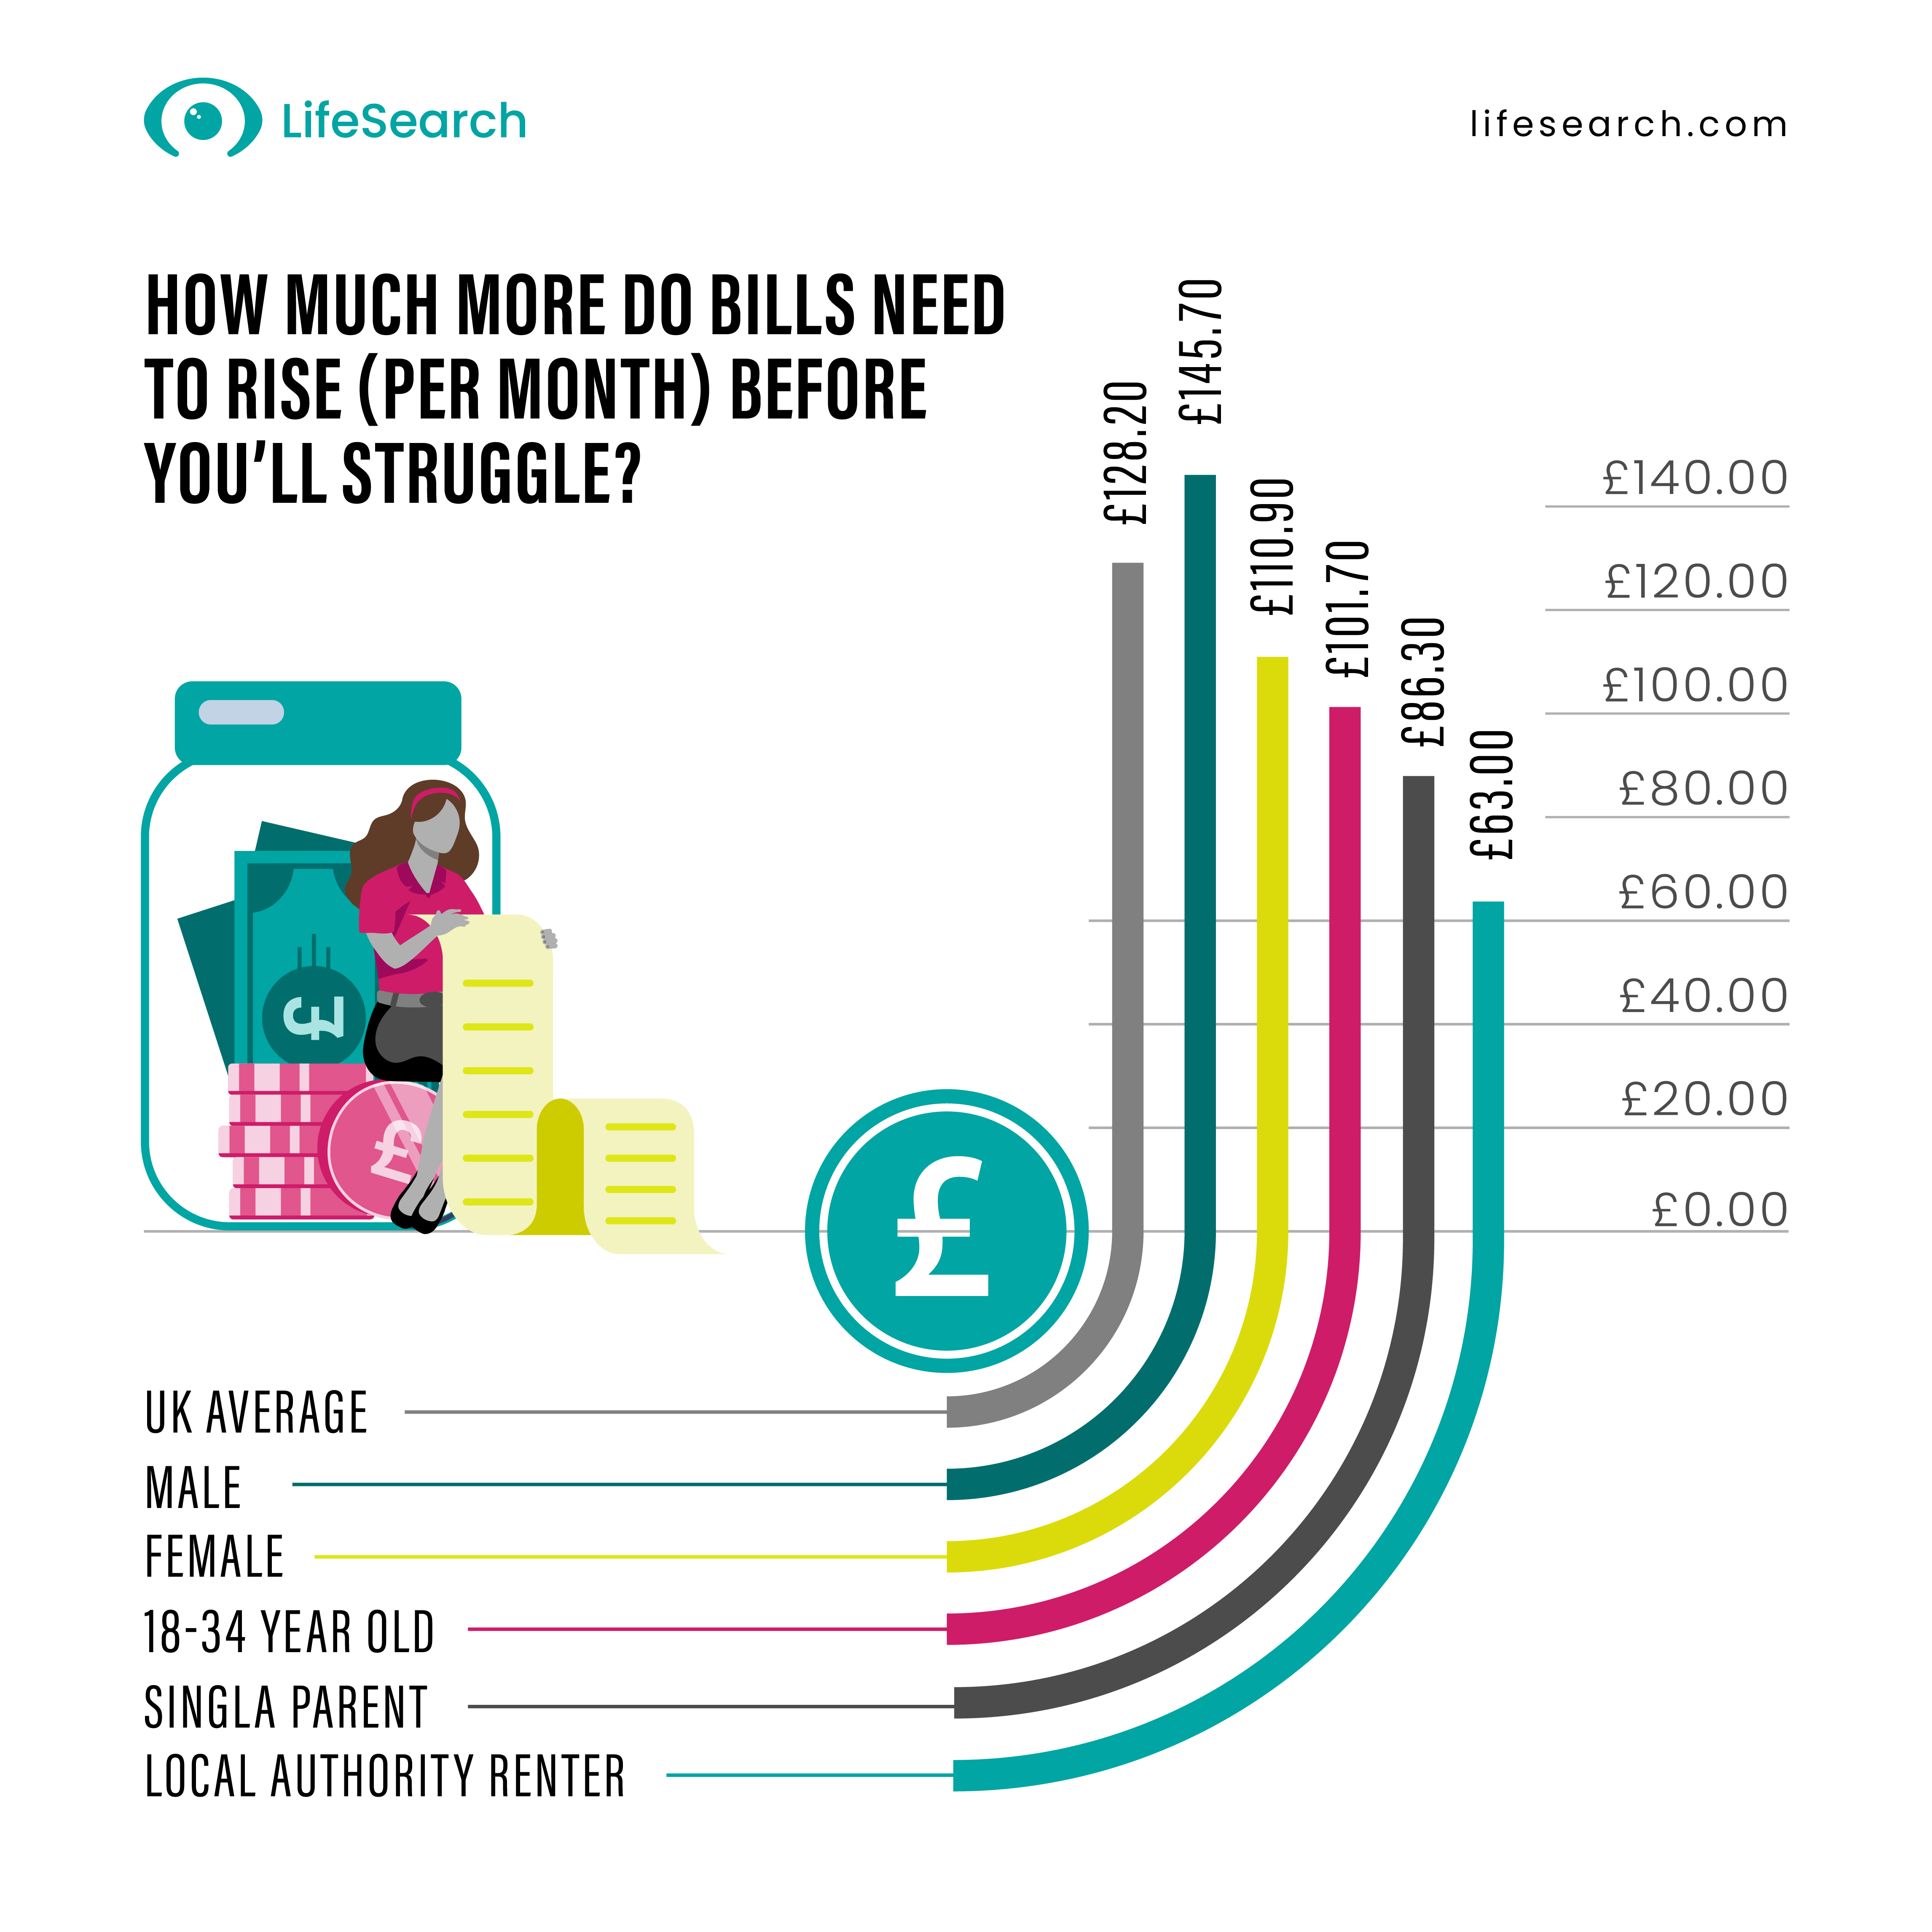 Table showing how much bills need to rise per month before they struggle